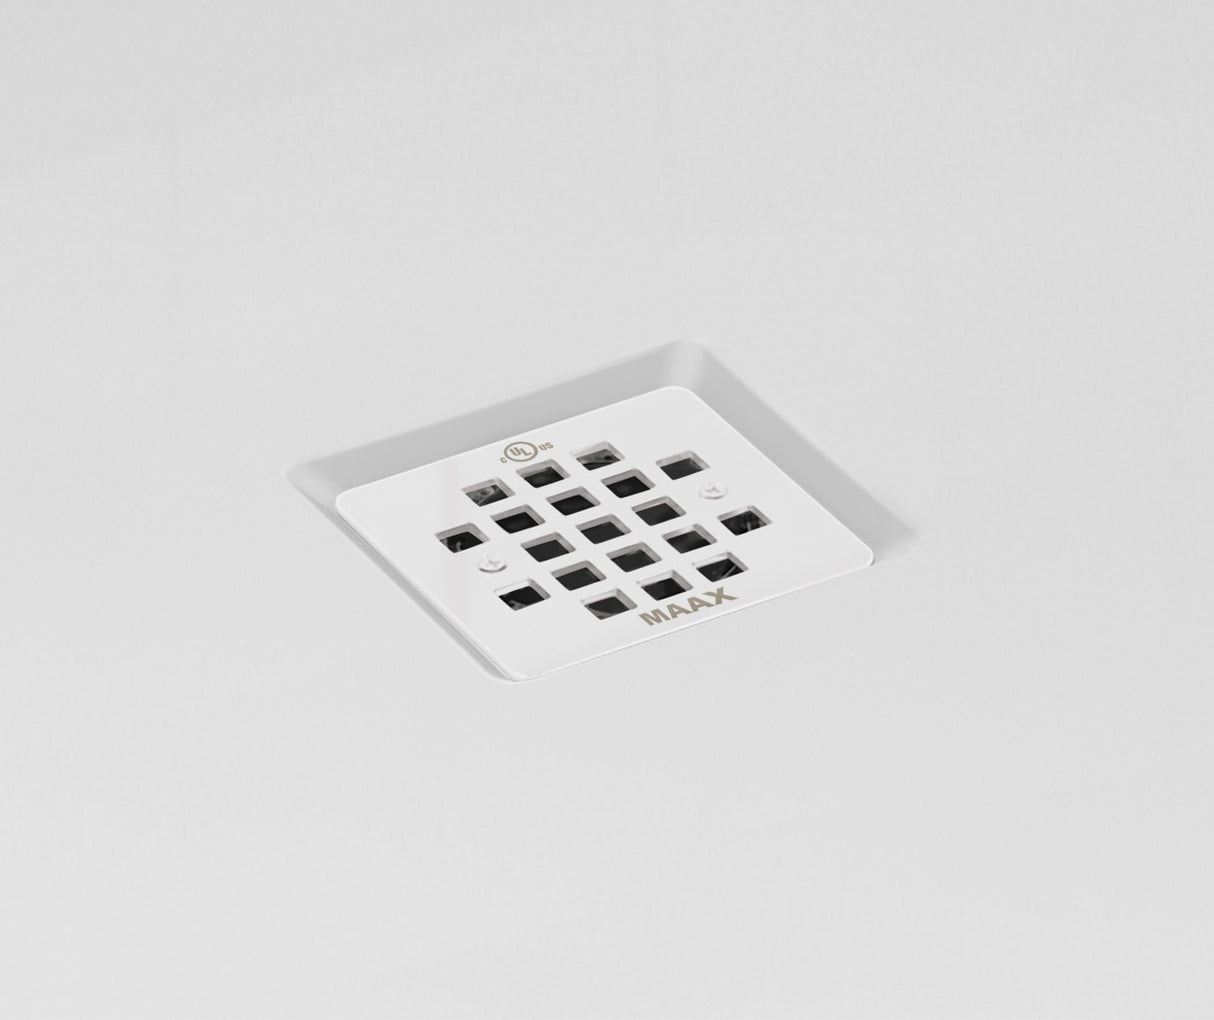 MAAX 420002-506-001-100 B3Square 4834 Acrylic Tunnel Shower Base in White with Center Drain